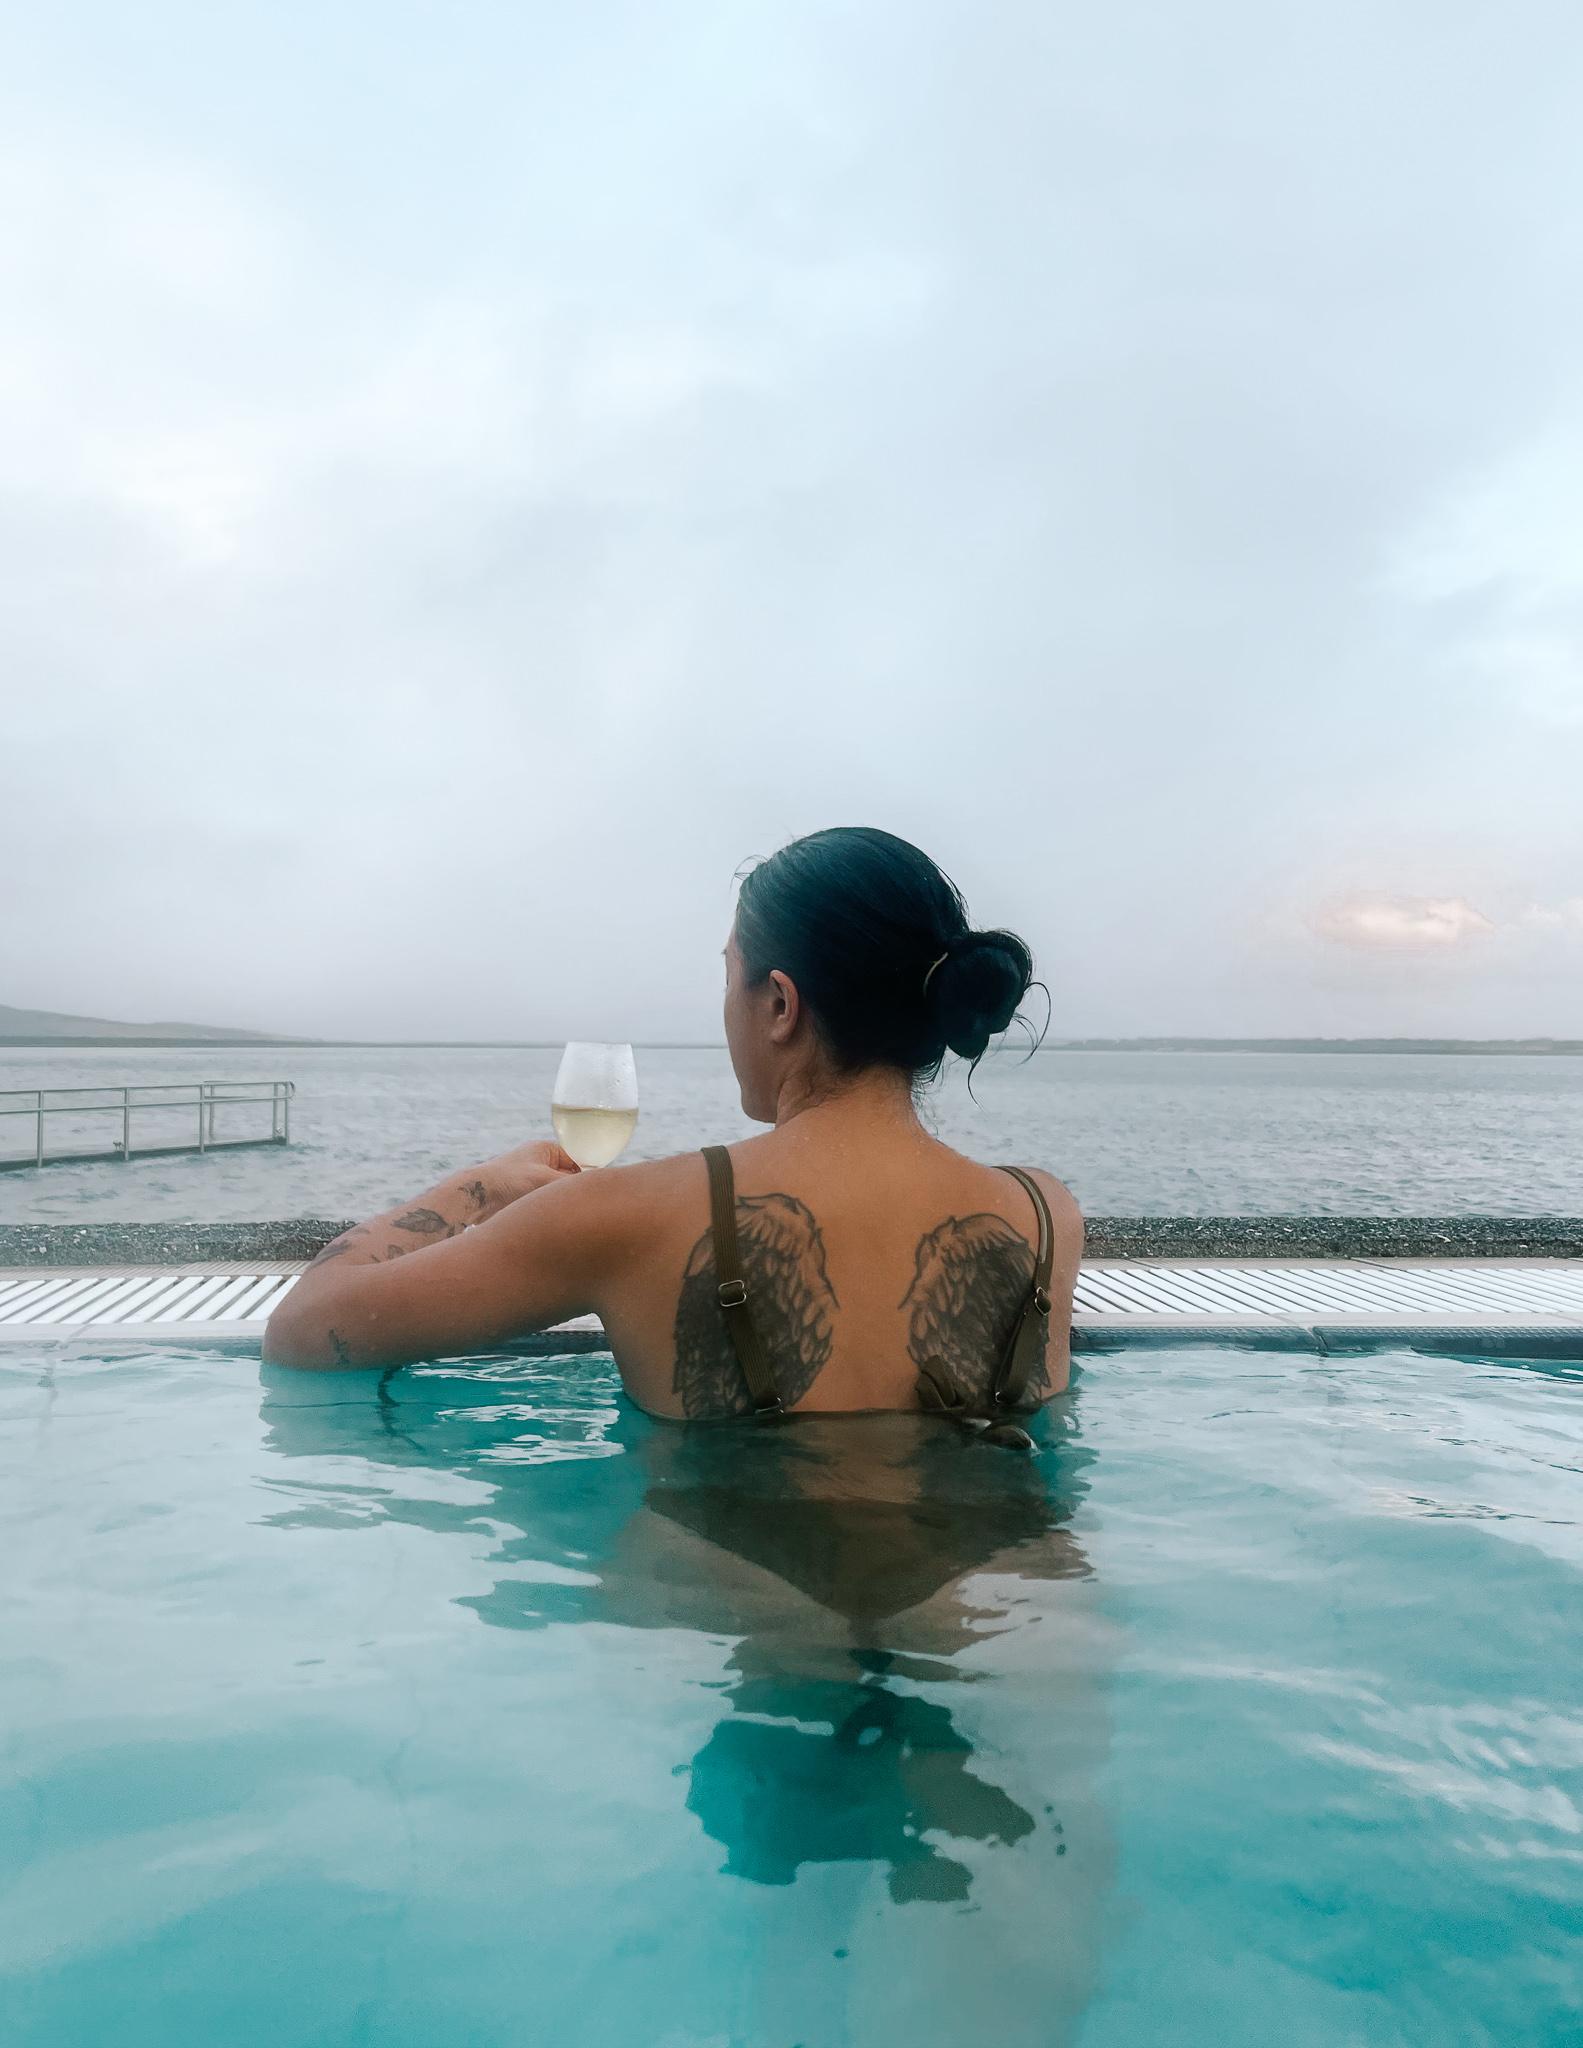 A woman holding a glass of white wine in Fontana Spa overlooking Laugarvatn Lake in Iceland